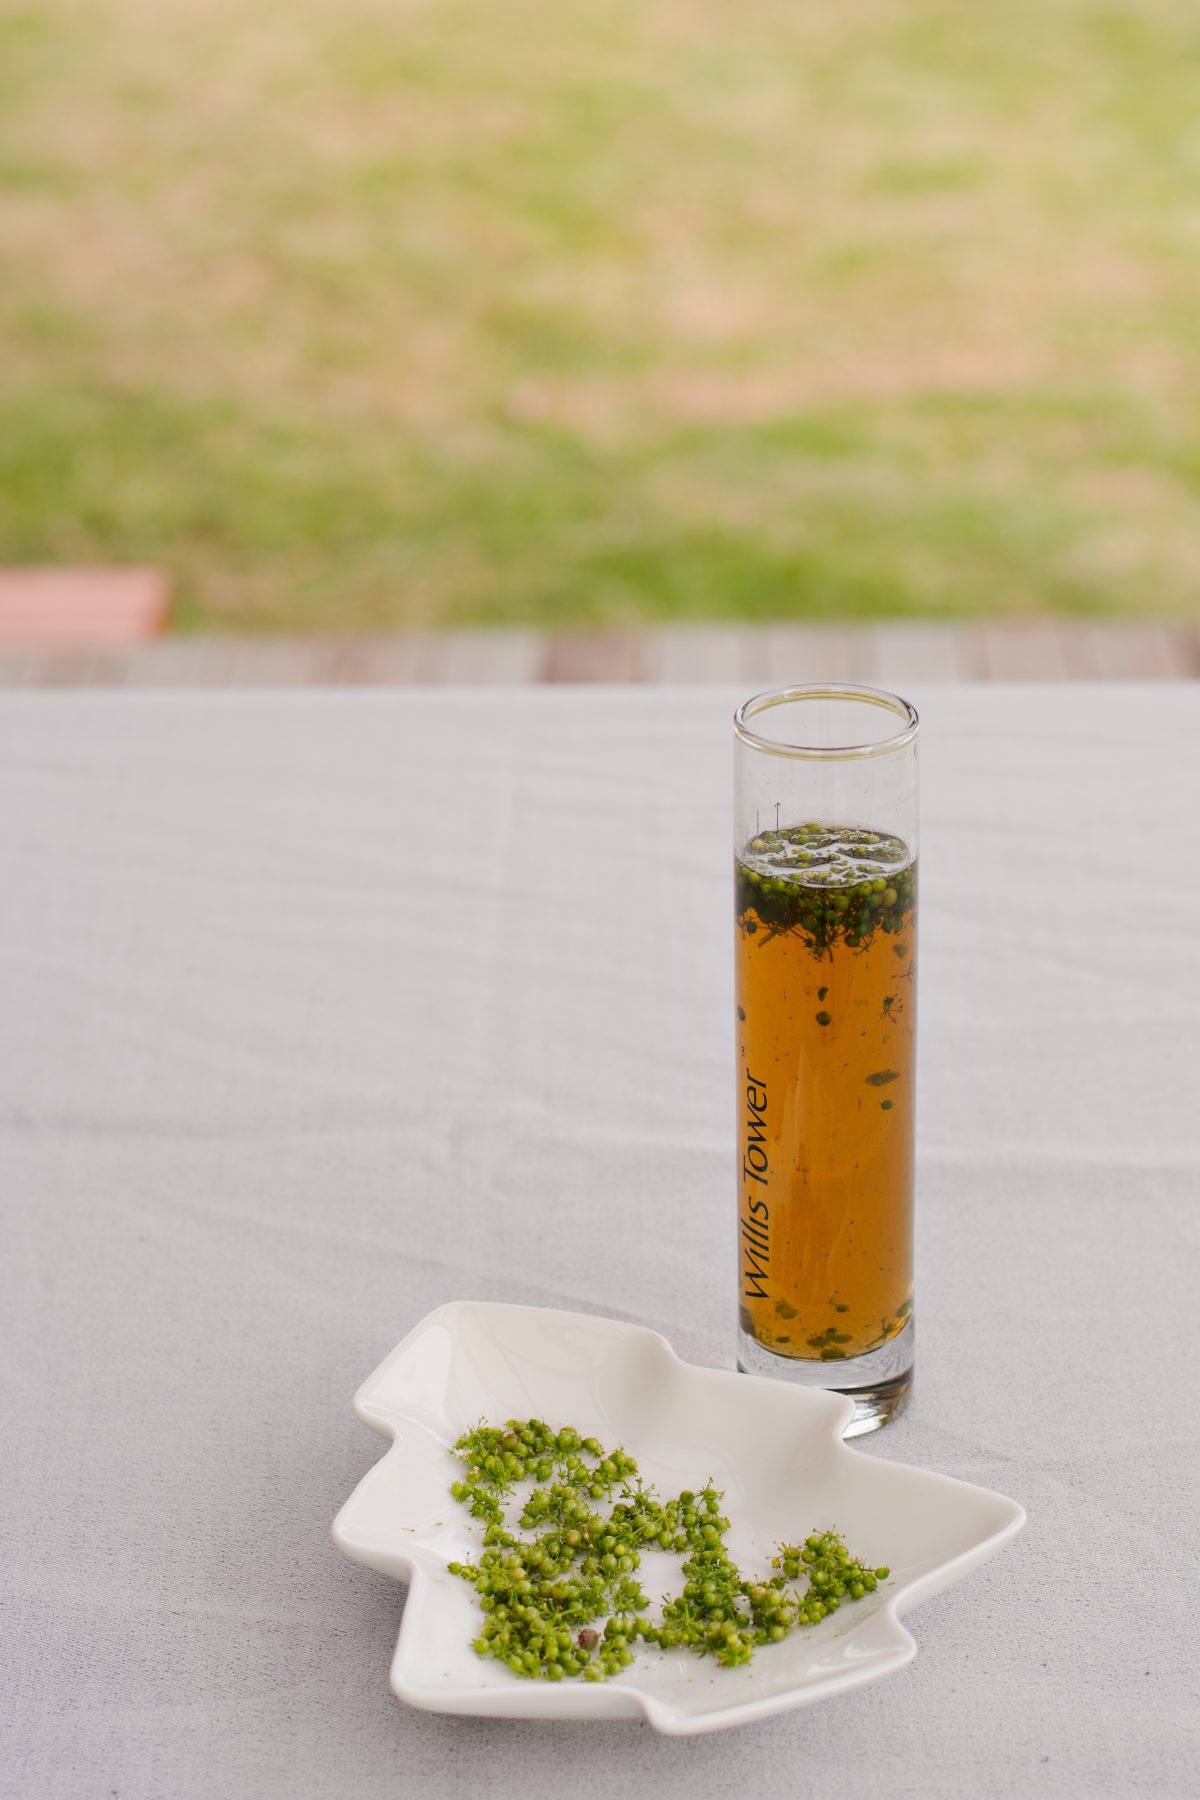 Sugar syrup infused with green coriander seeds - thespiceadventuress.com